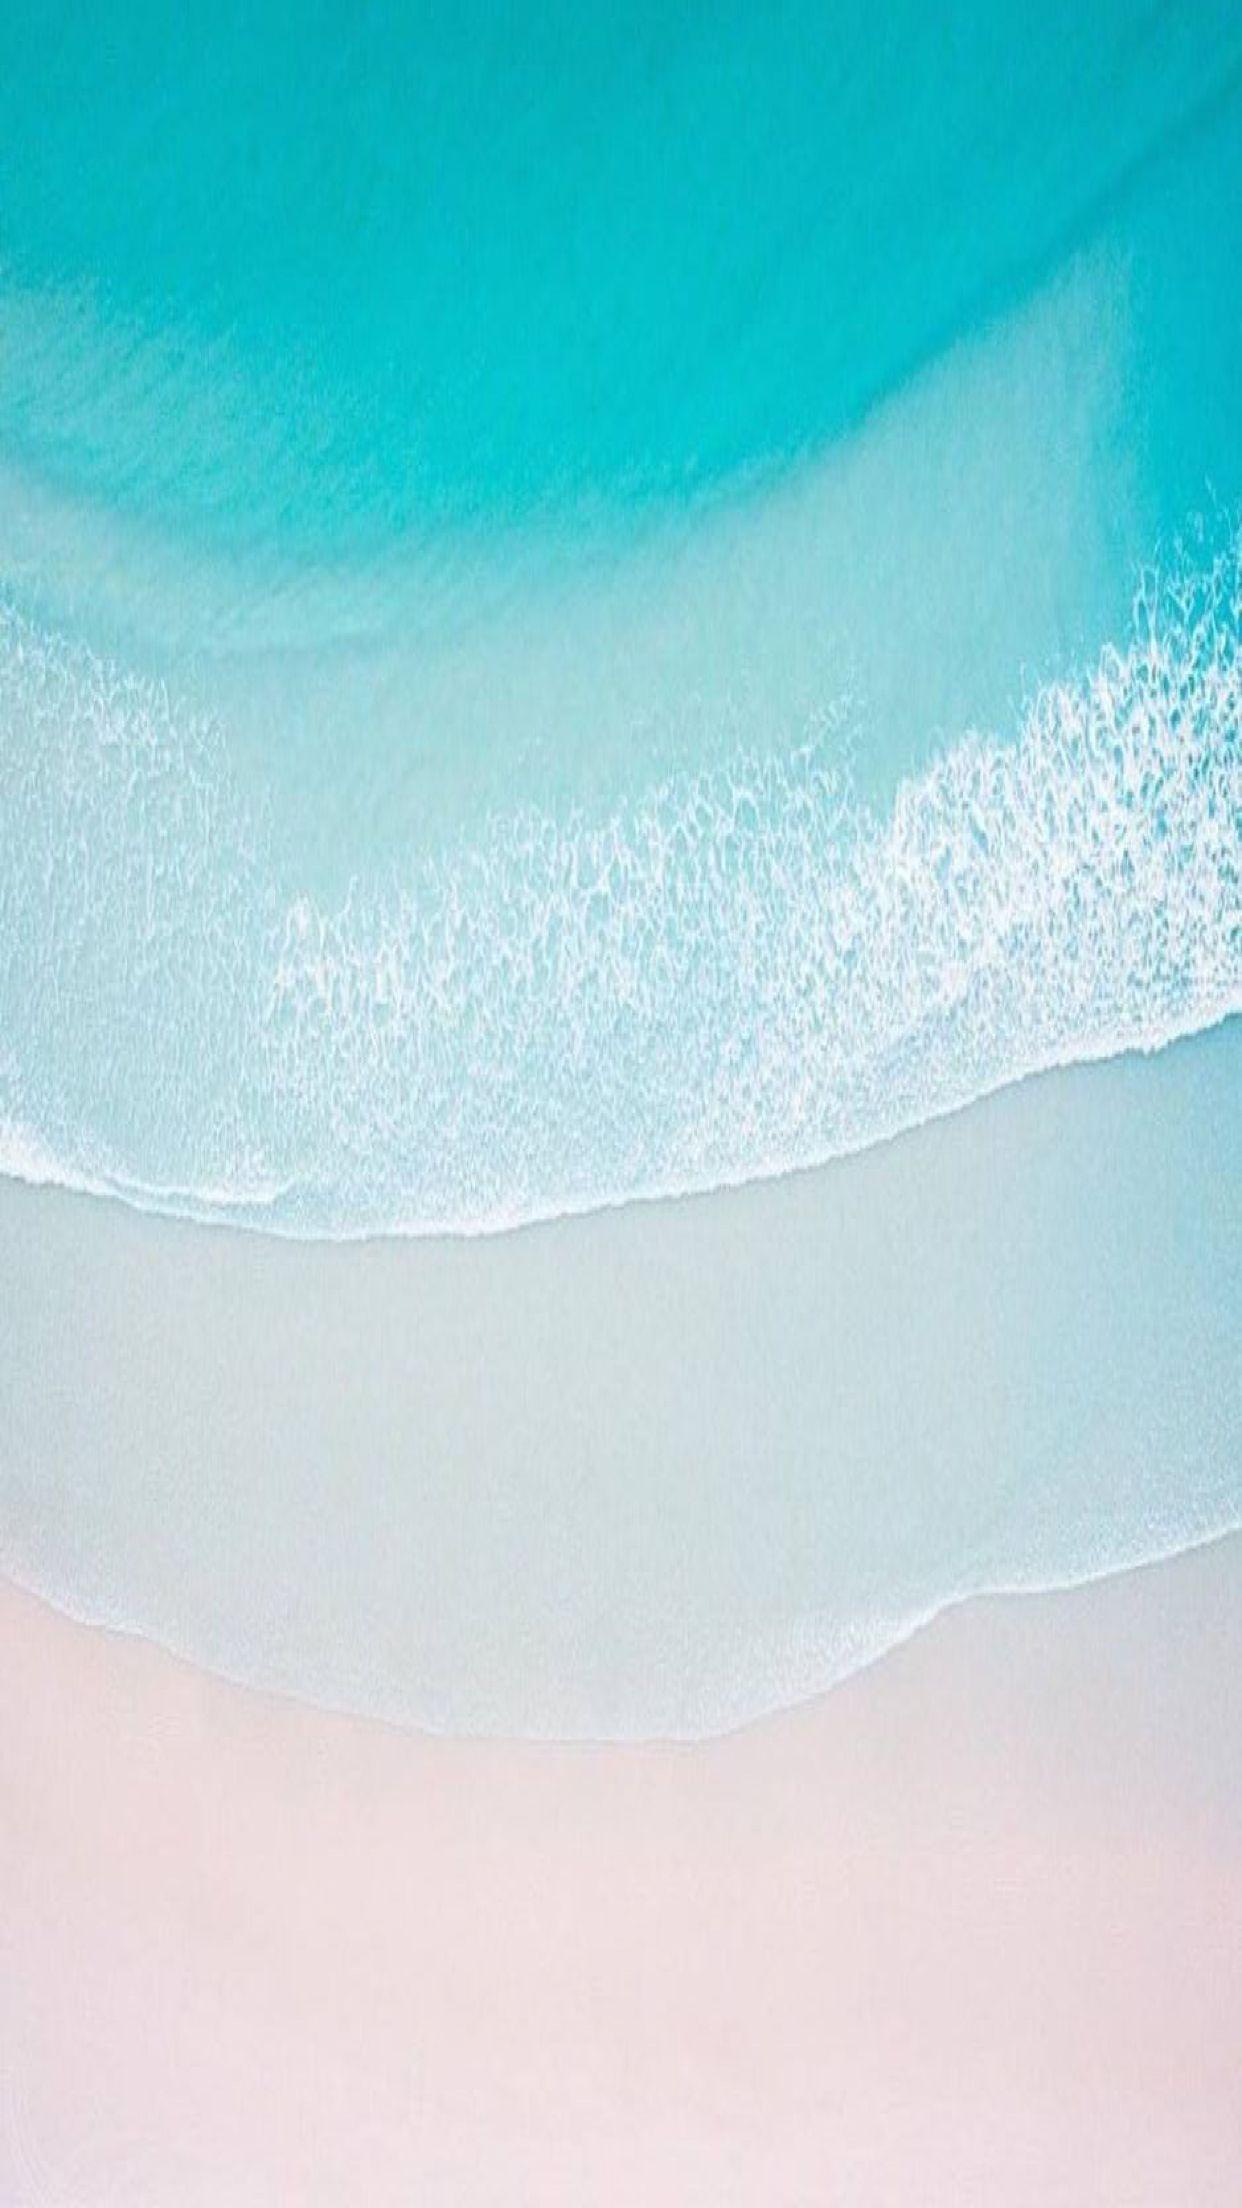 35+ Clean iPhone Wallpapers